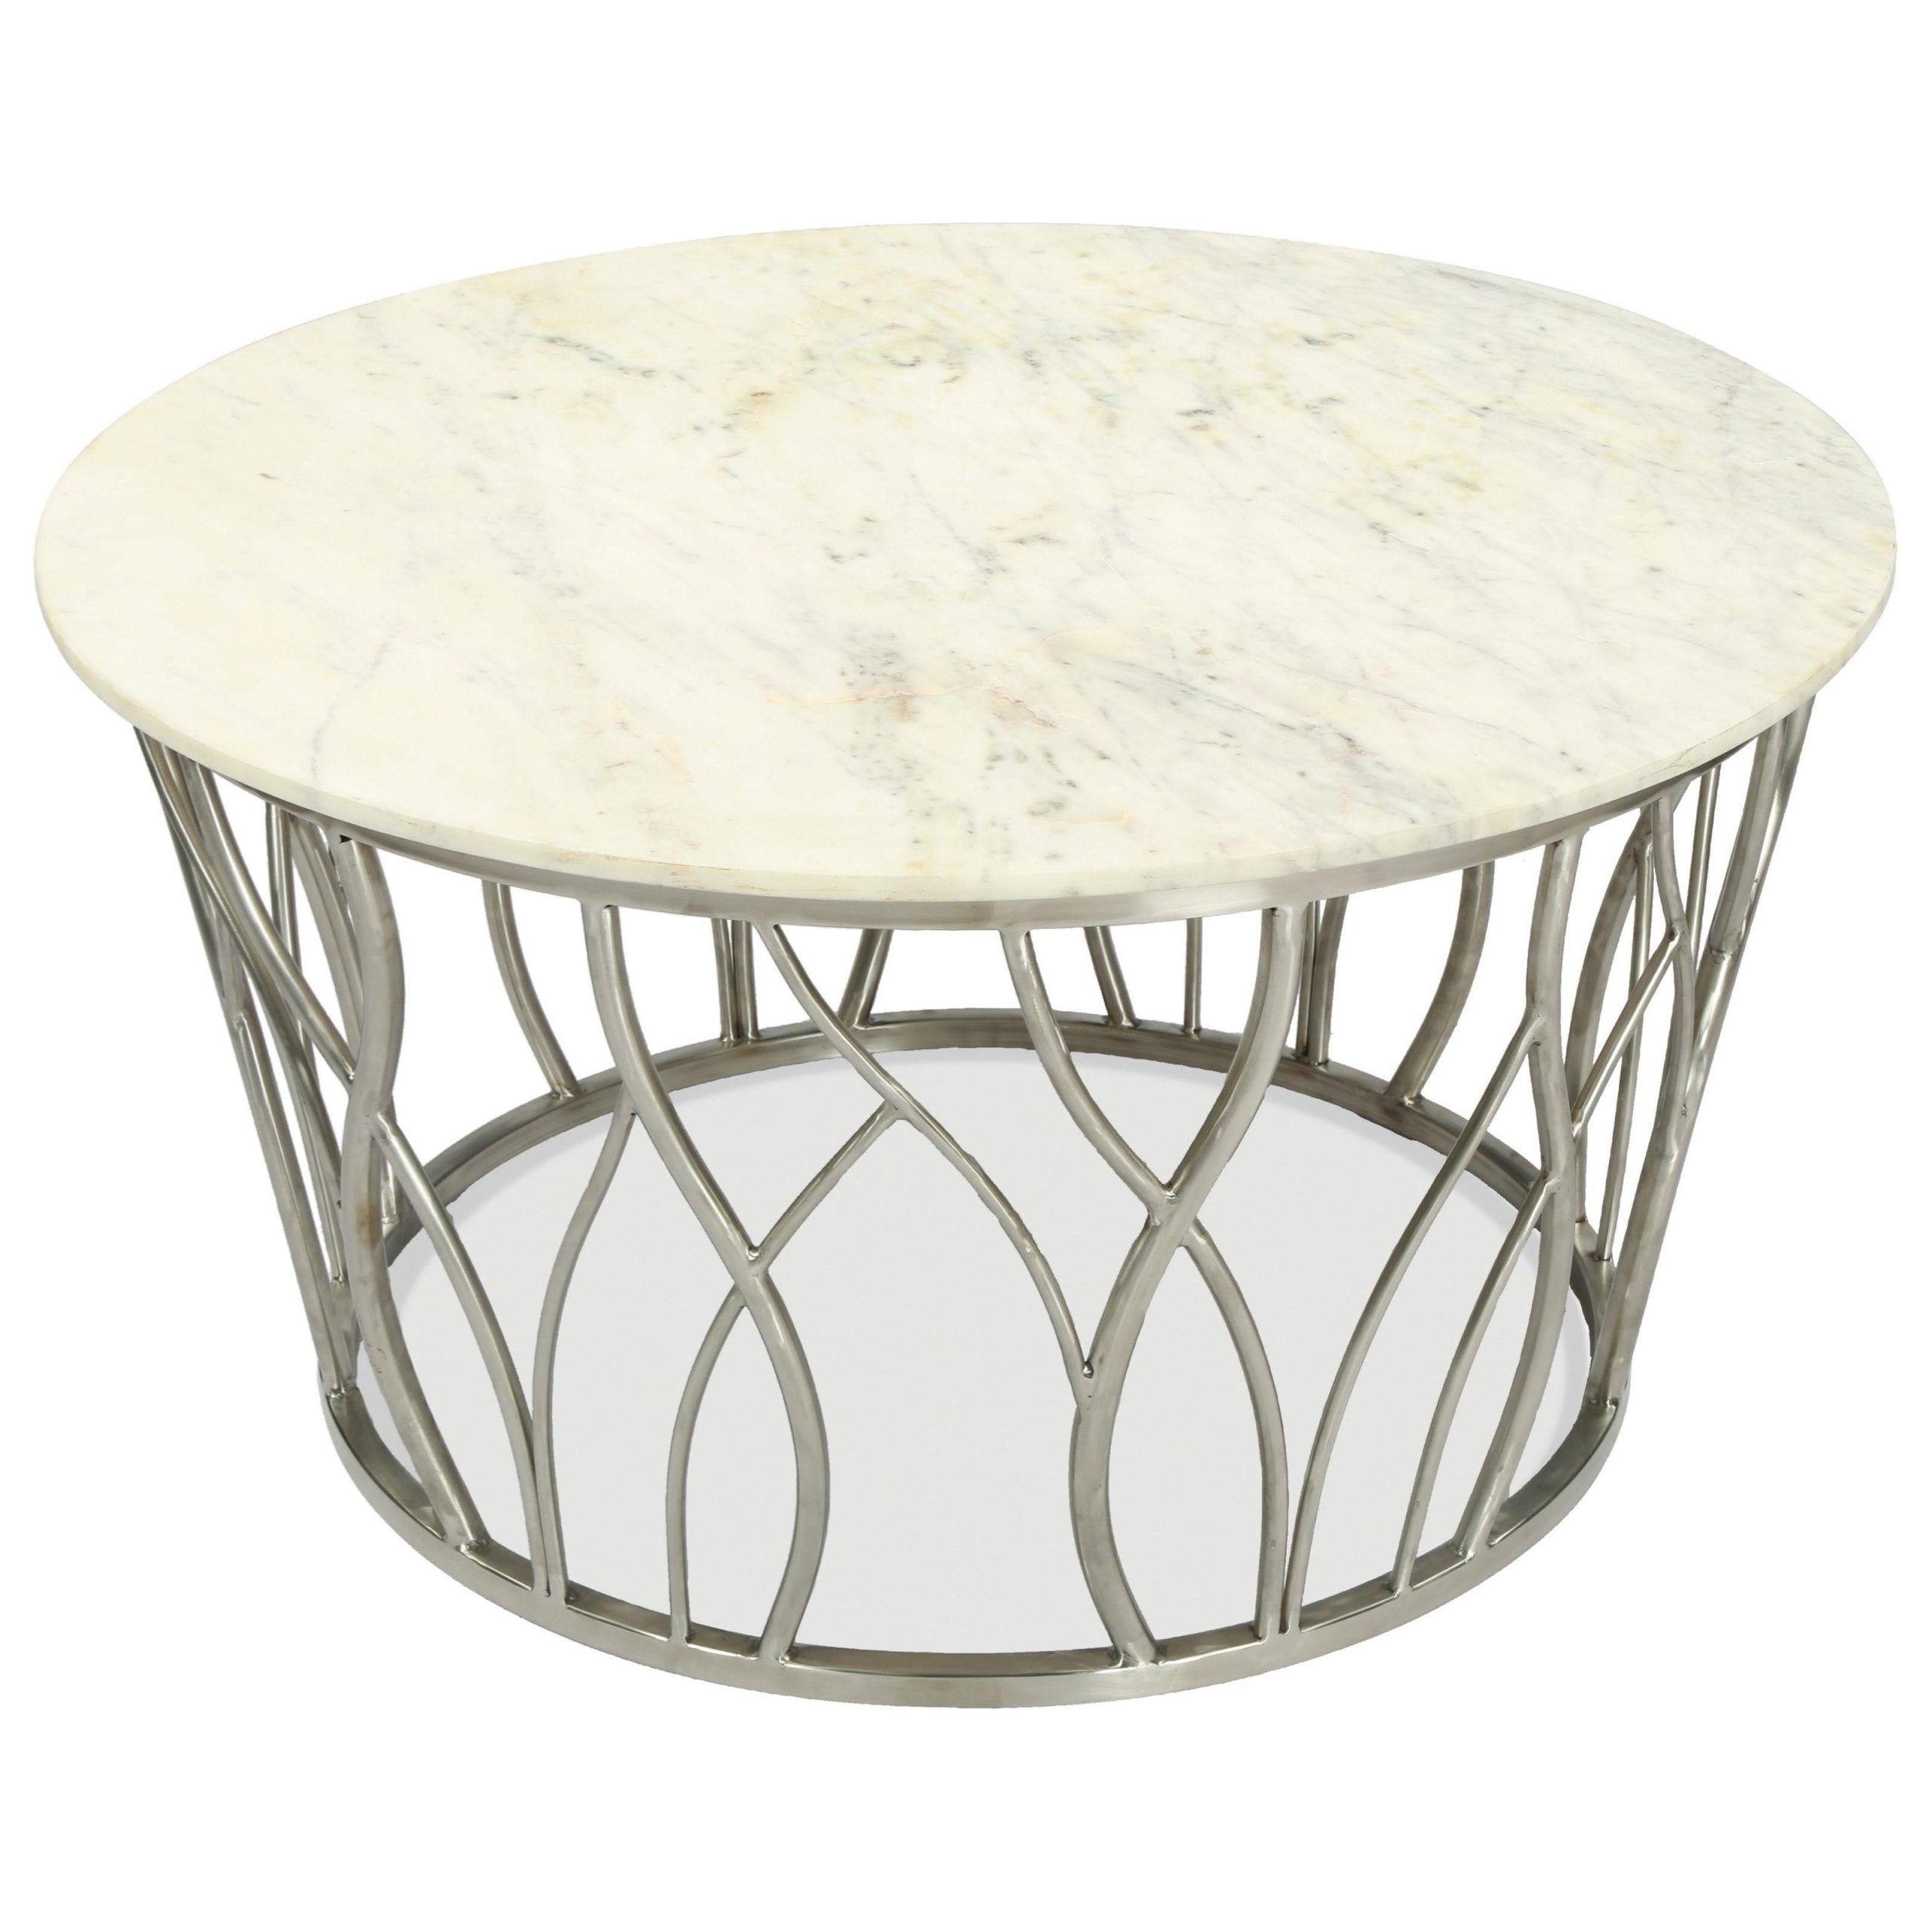 Riverside Furniture Ulysses 53702 Transitional Round Within Preferred Marble Top Coffee Tables (View 12 of 20)